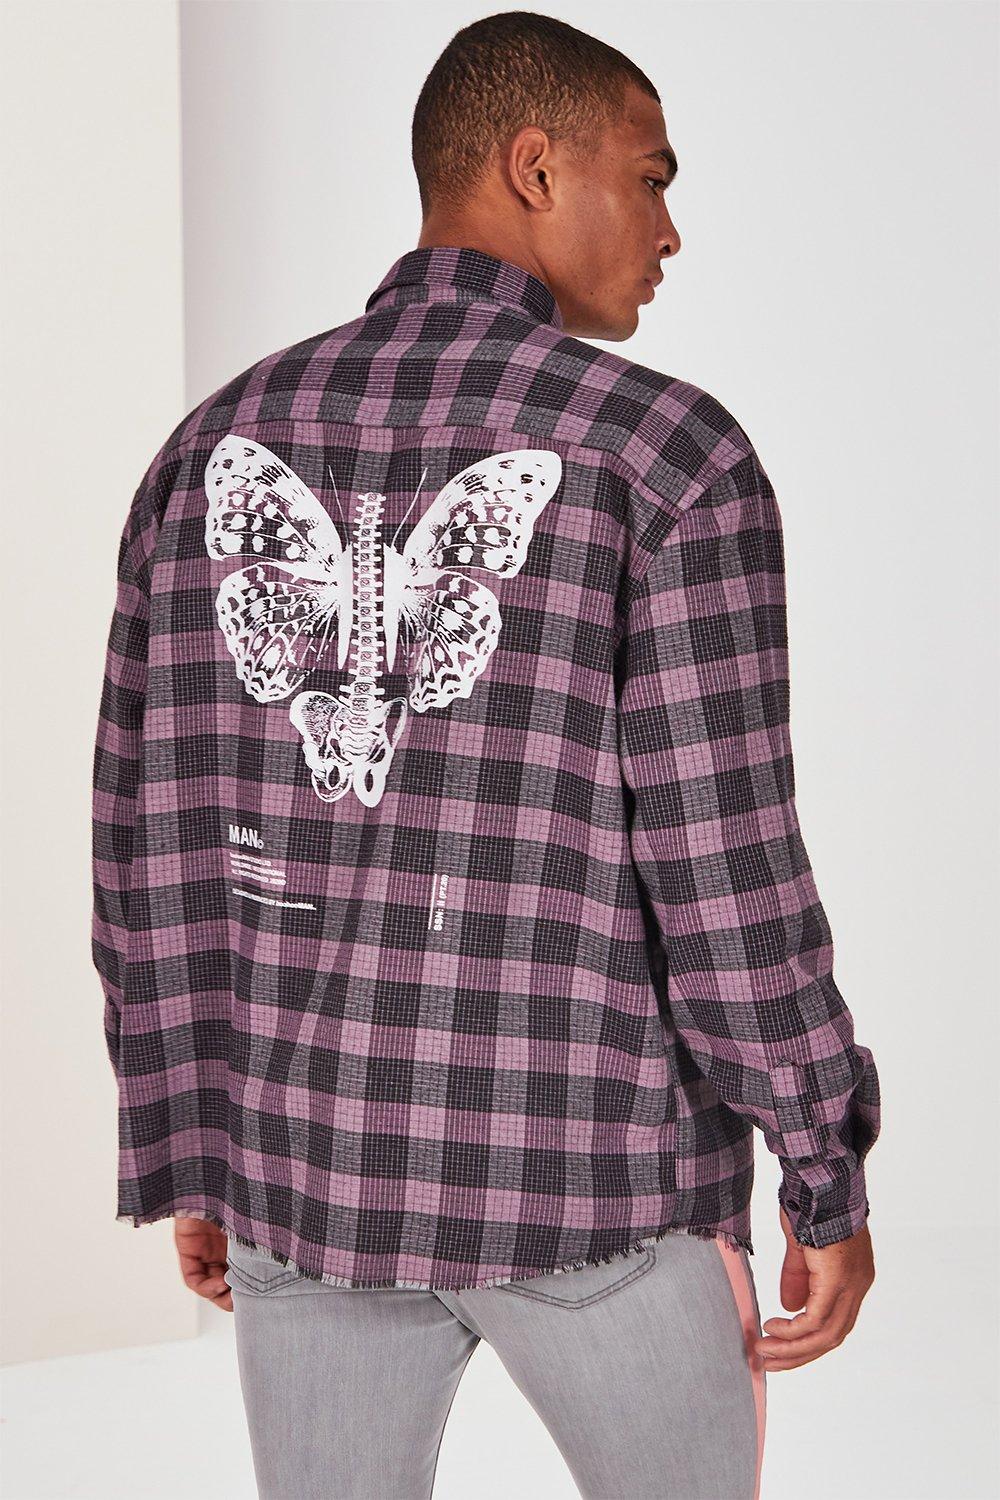 SALE MAN Official Butterfly Print Check Shirt